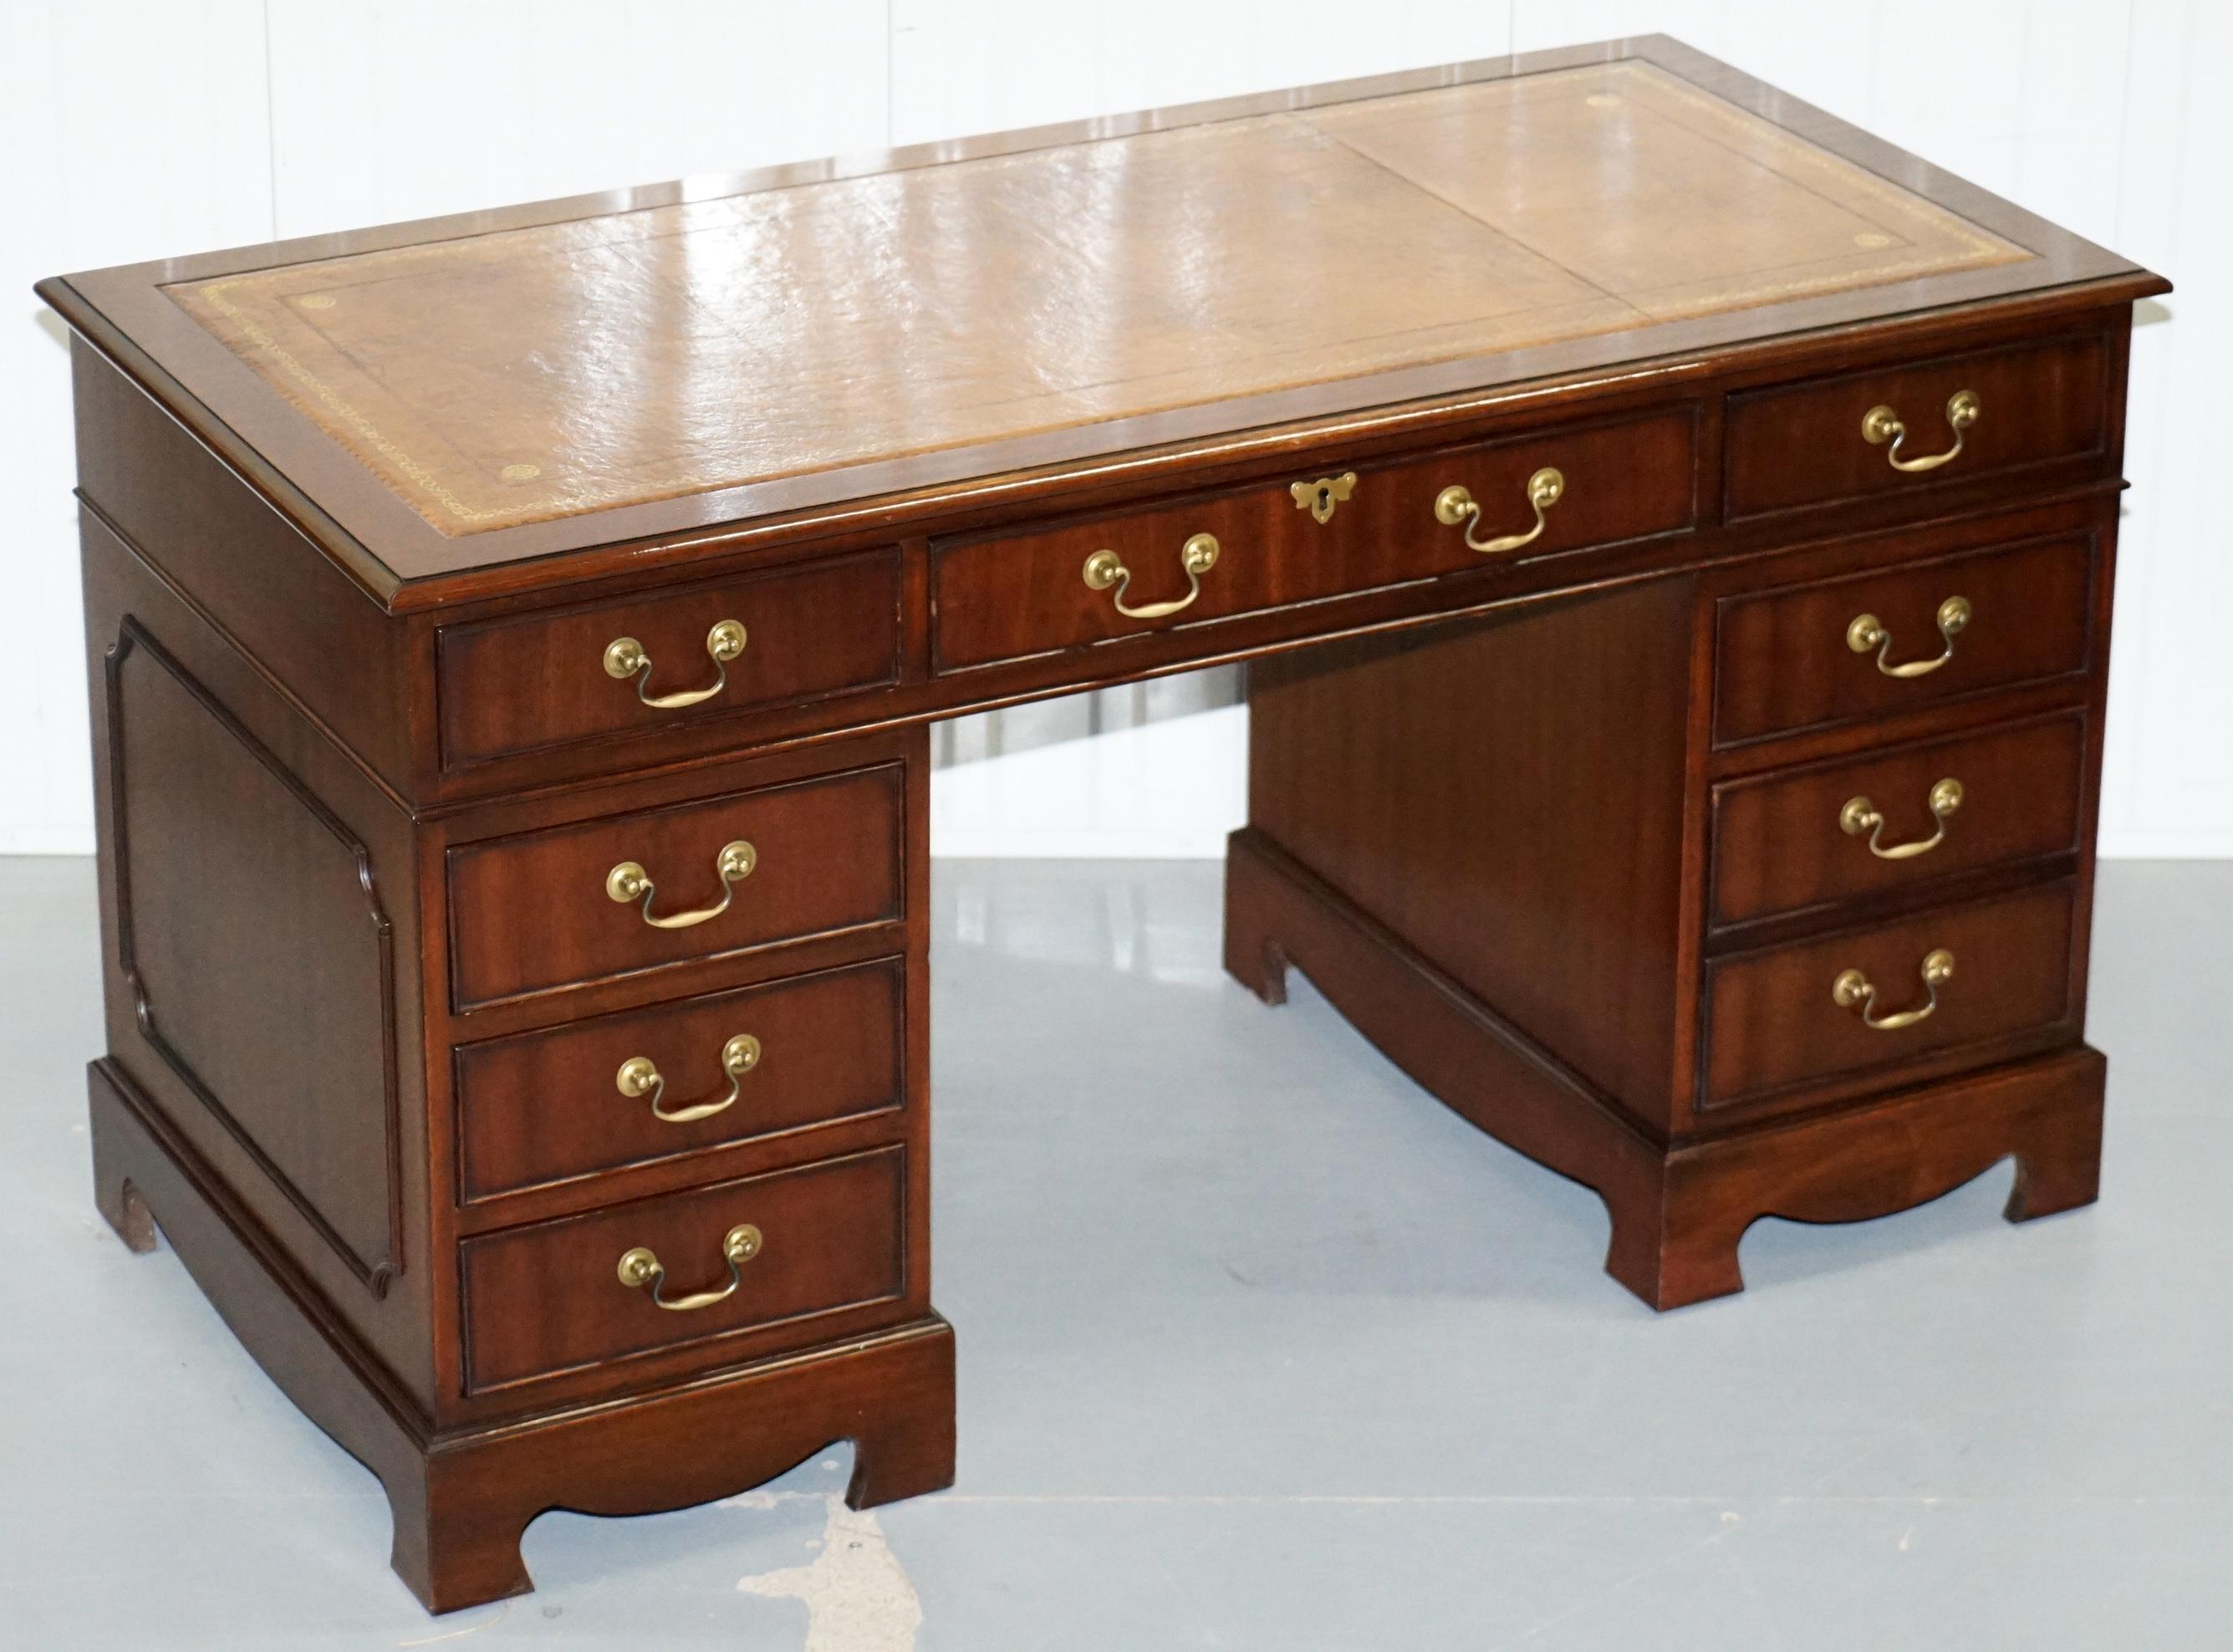 We are delighted to offer for sale this lovely luxury premium flamed mahogany with brown leather writing surface twin pedestal partner desk

This desk has the tradition drawer formation which is all standard drawers and one bottom right double